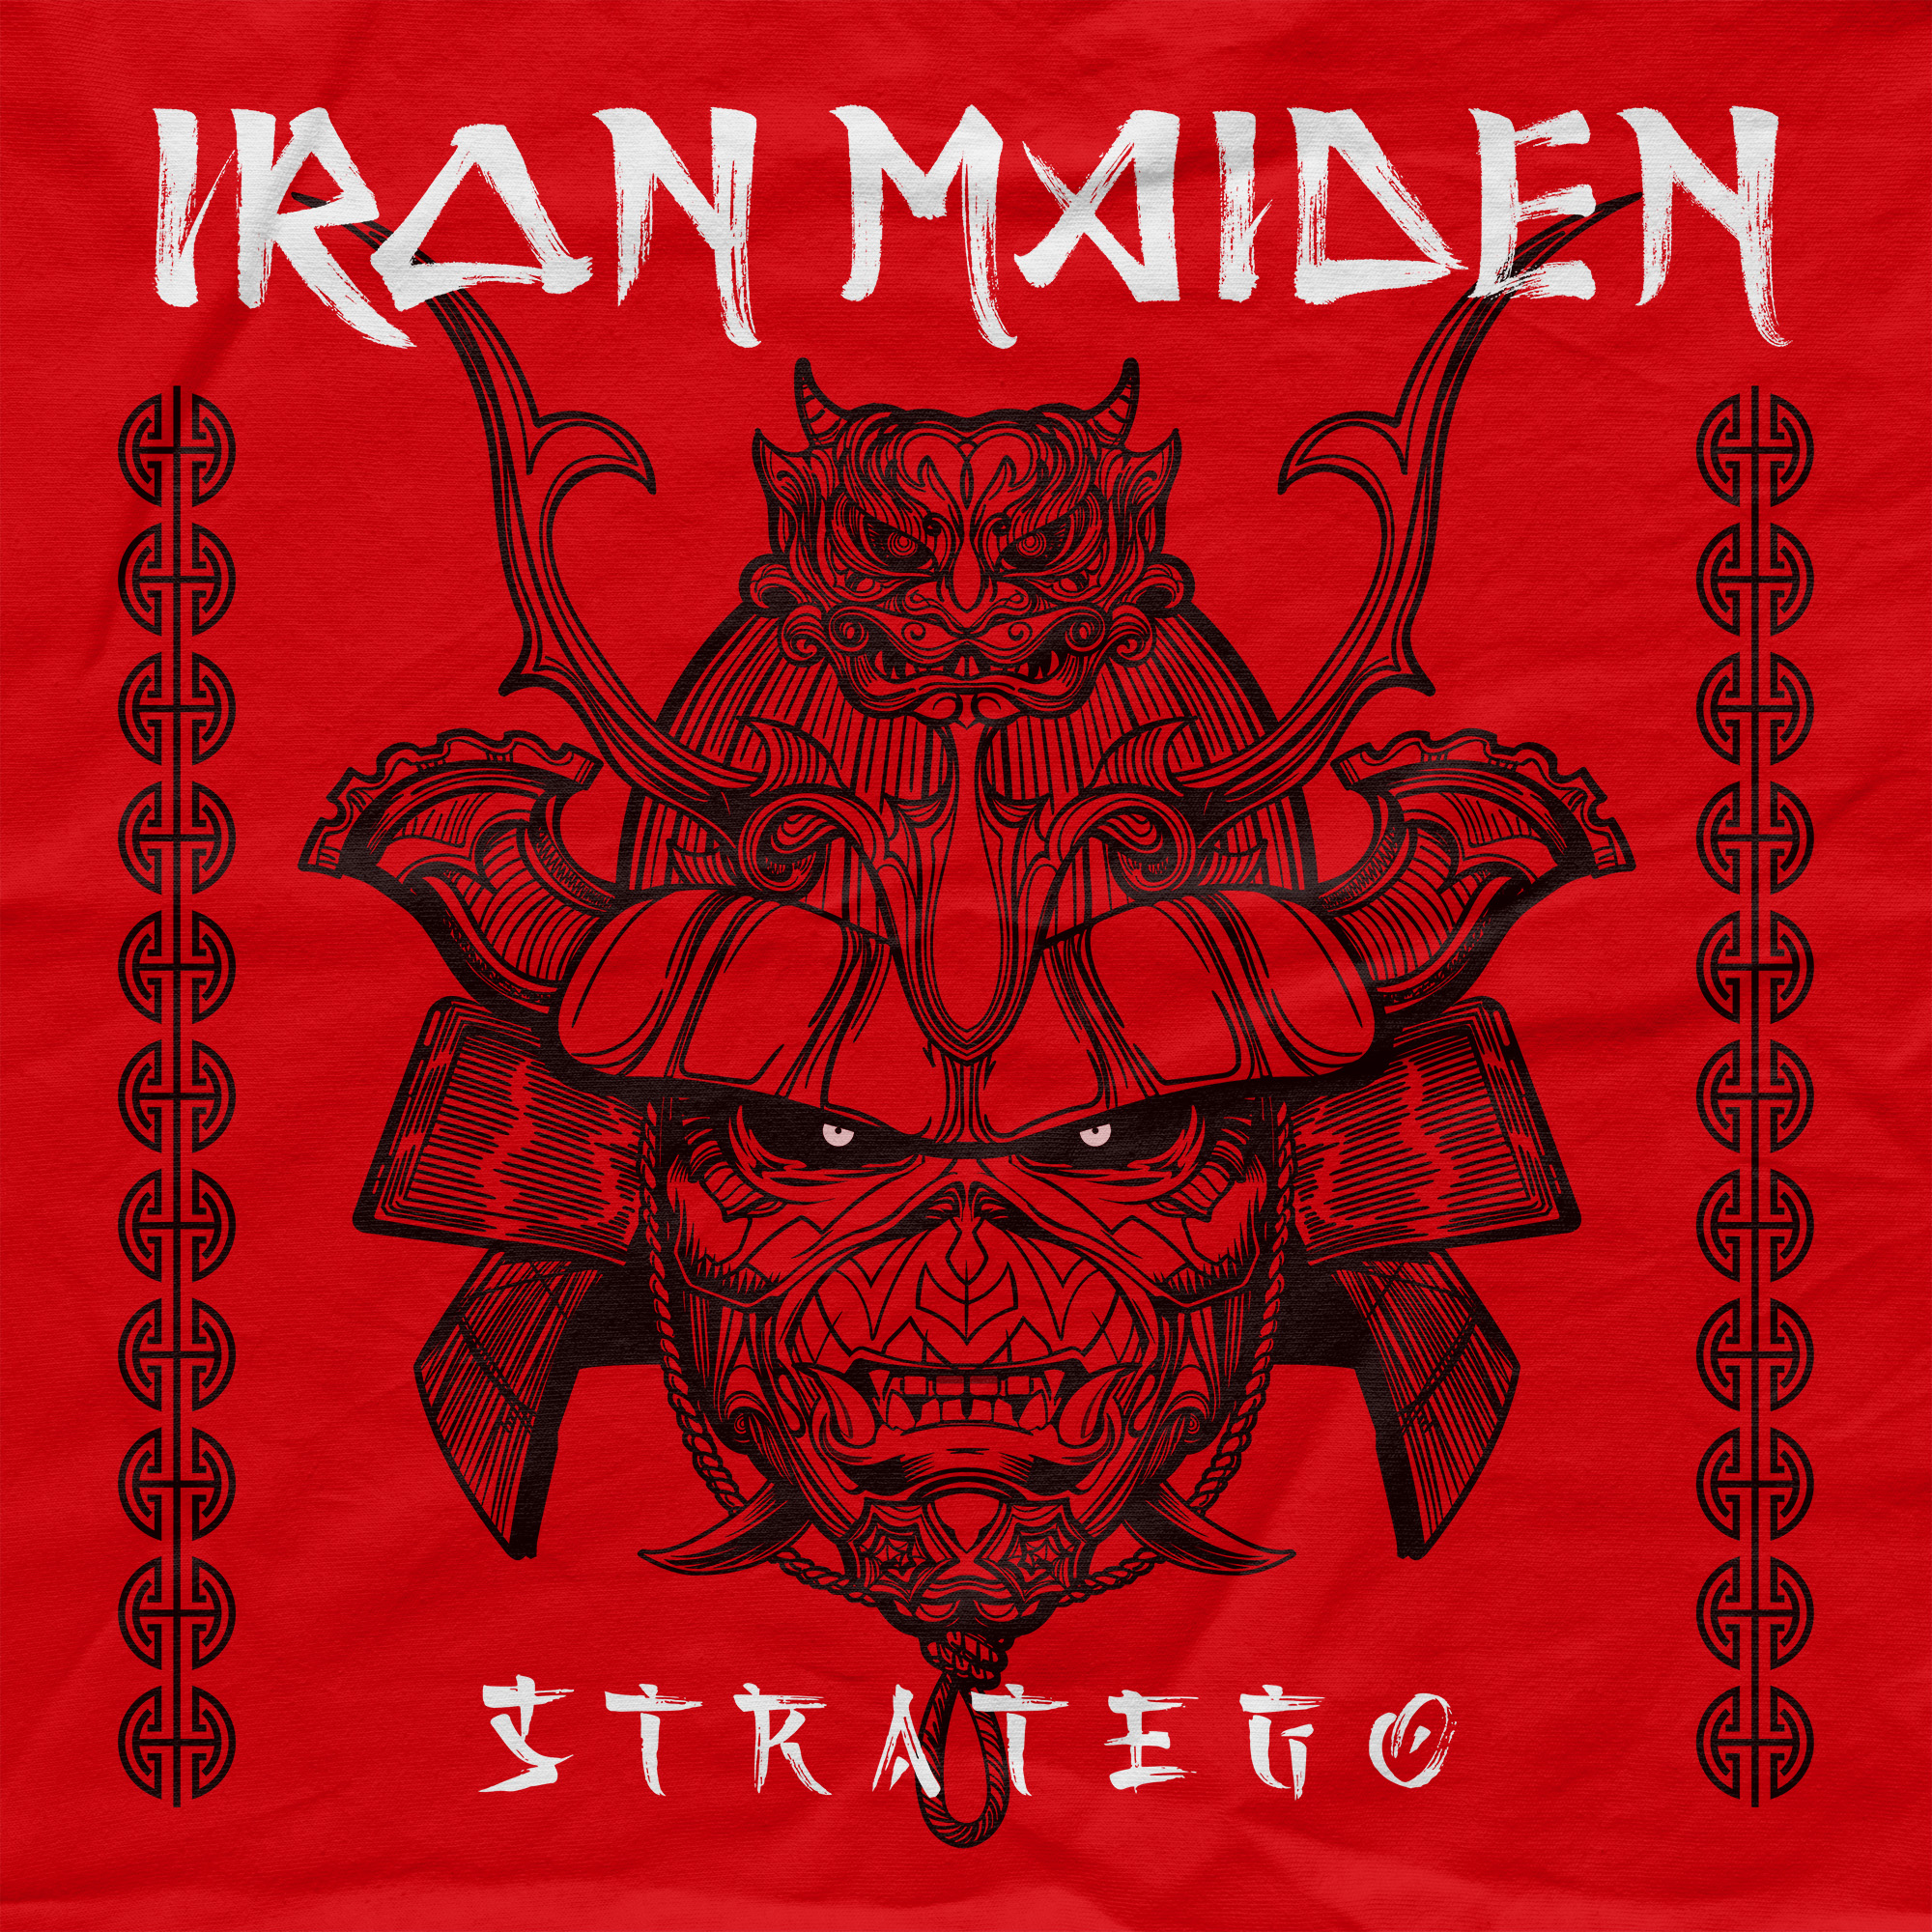 Iron Maiden on X: The new track 'Stratego' is available to stream right  now!  If it's not available on your favourite  platform it should be appearing shortly… Enjoy! #IronMaiden #Stratego  #Senjutsu